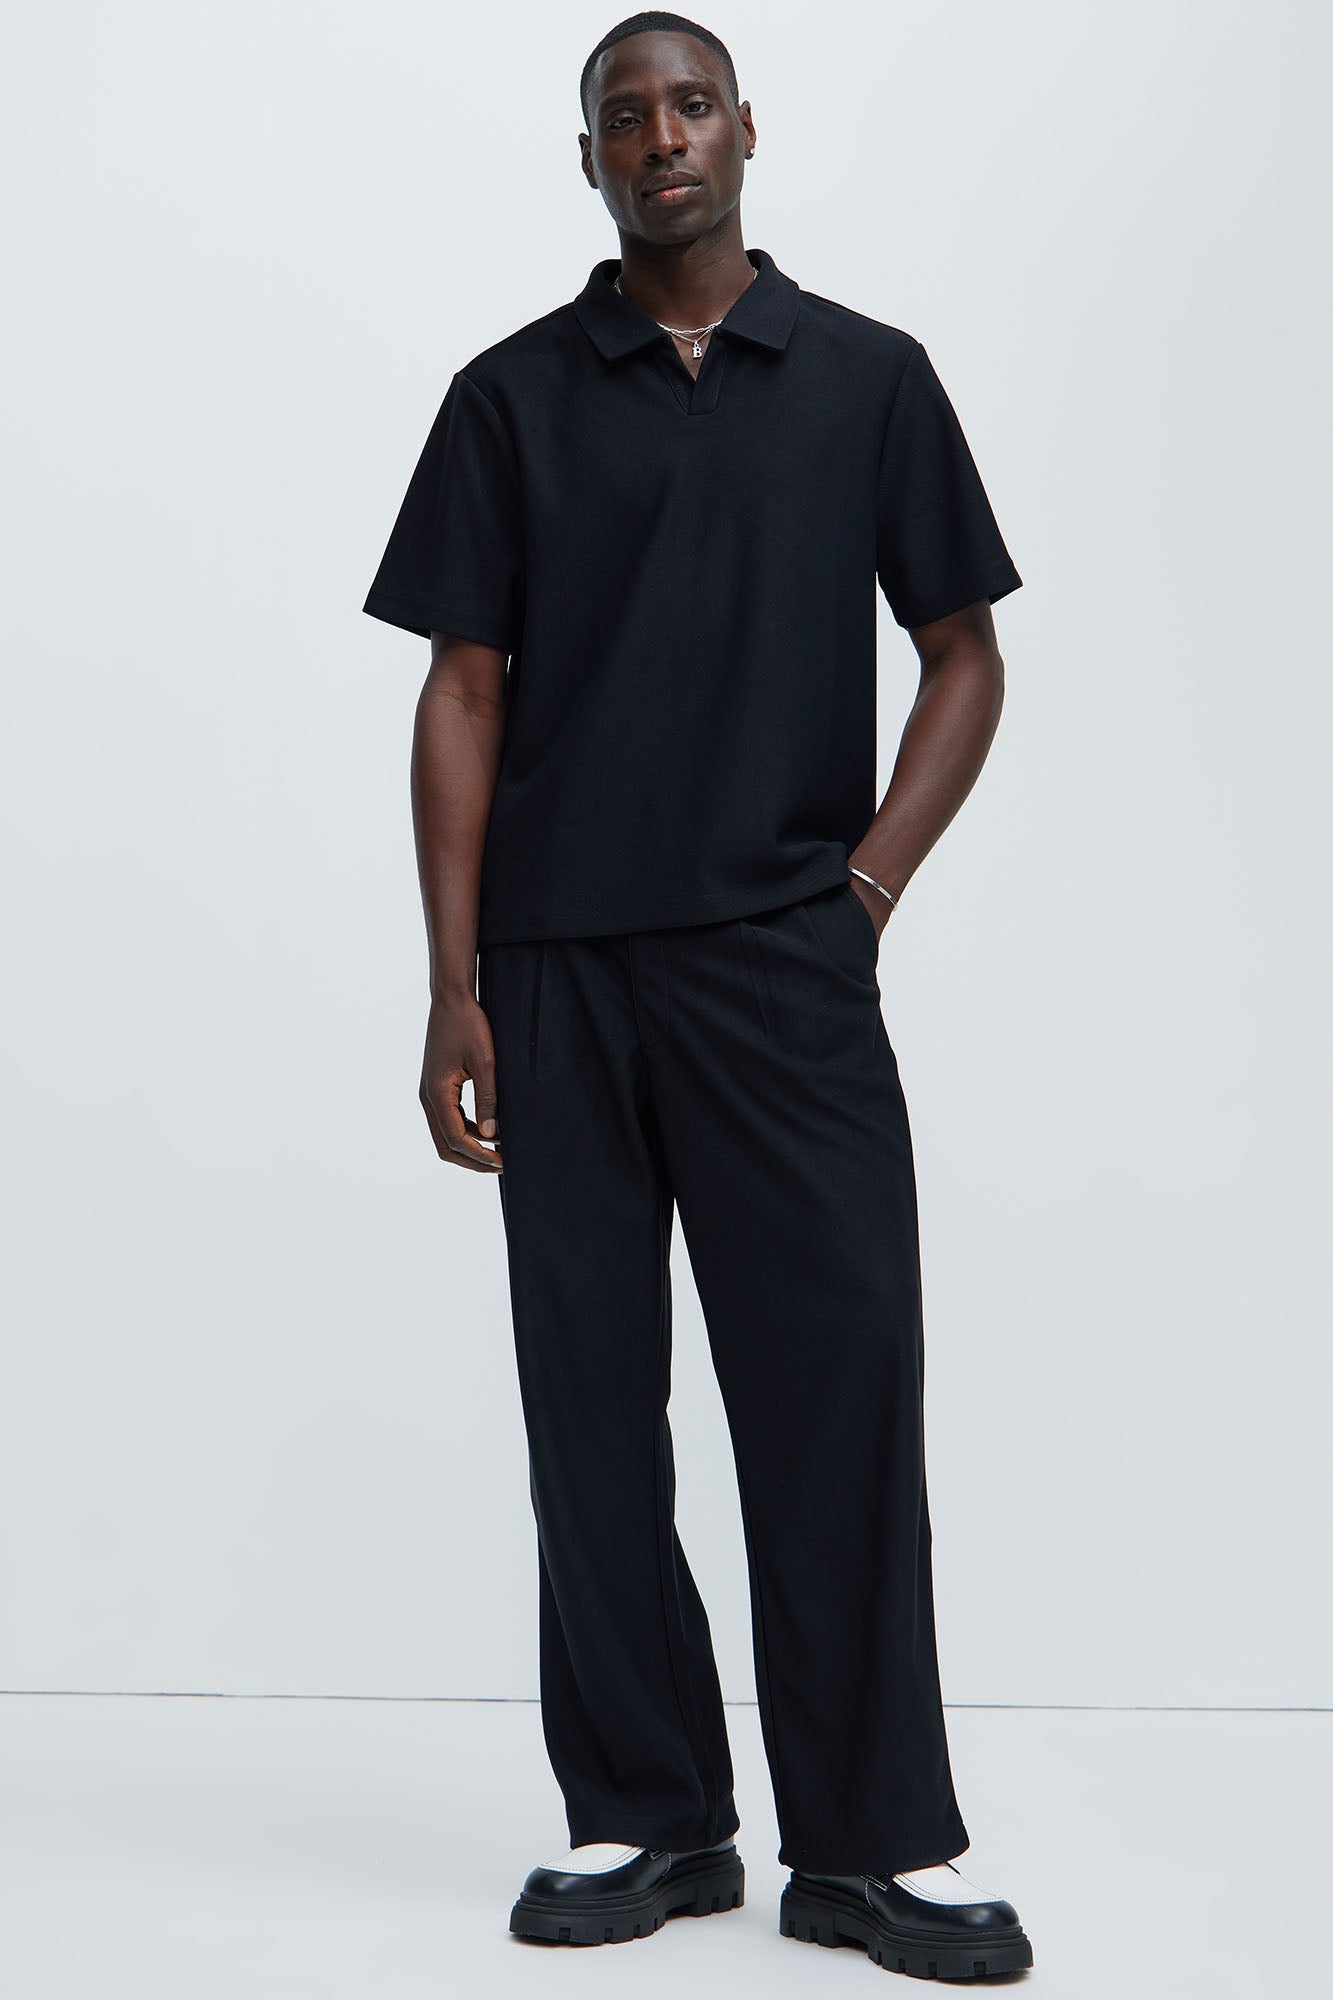 Classic Cool: Turner Short Sleeve Polo in Black